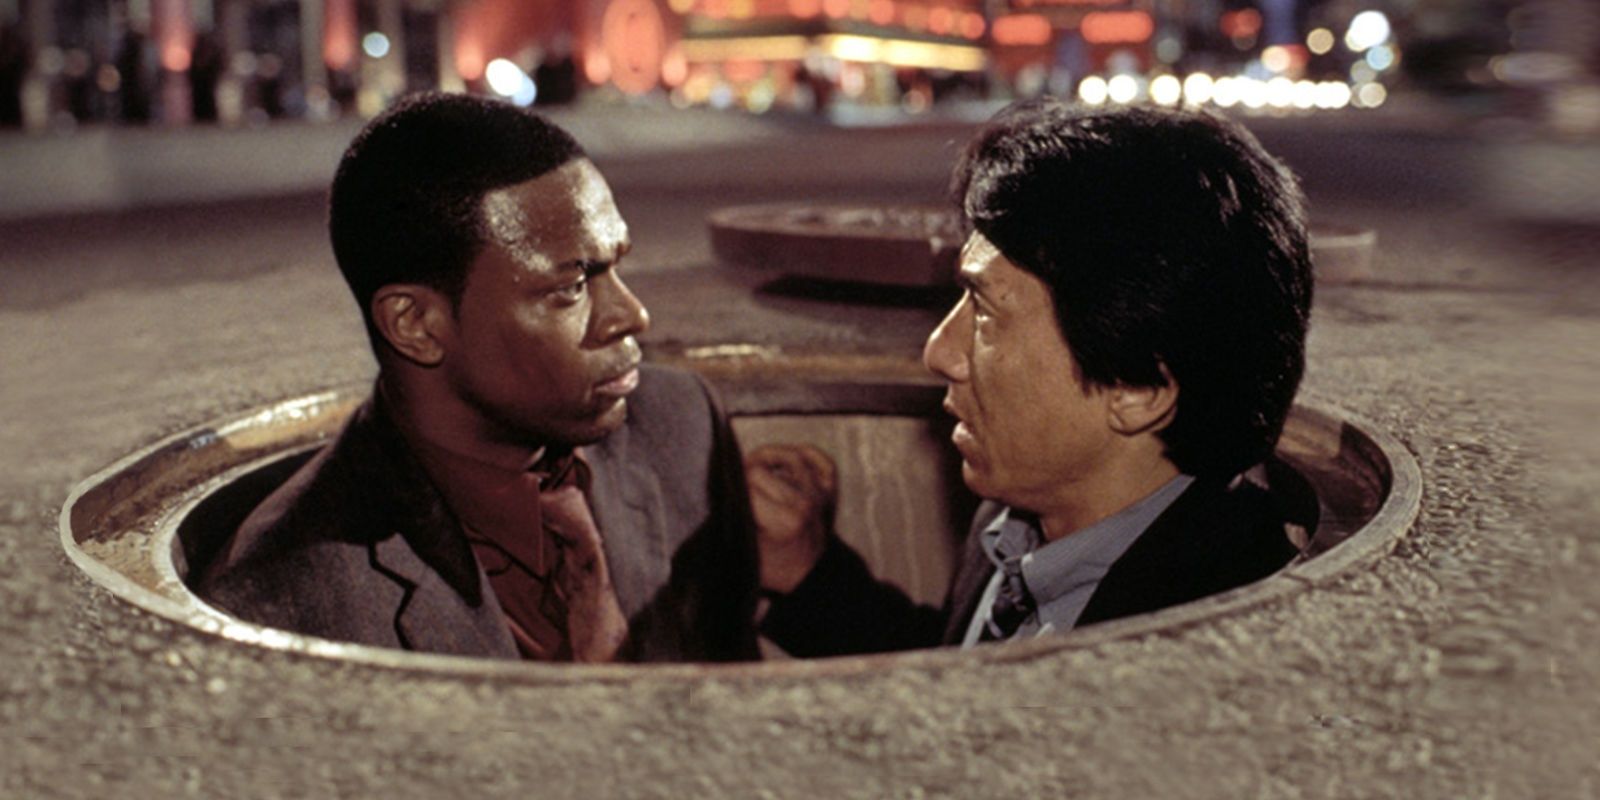 Better Movie Sequels RushHour 2 Cropped